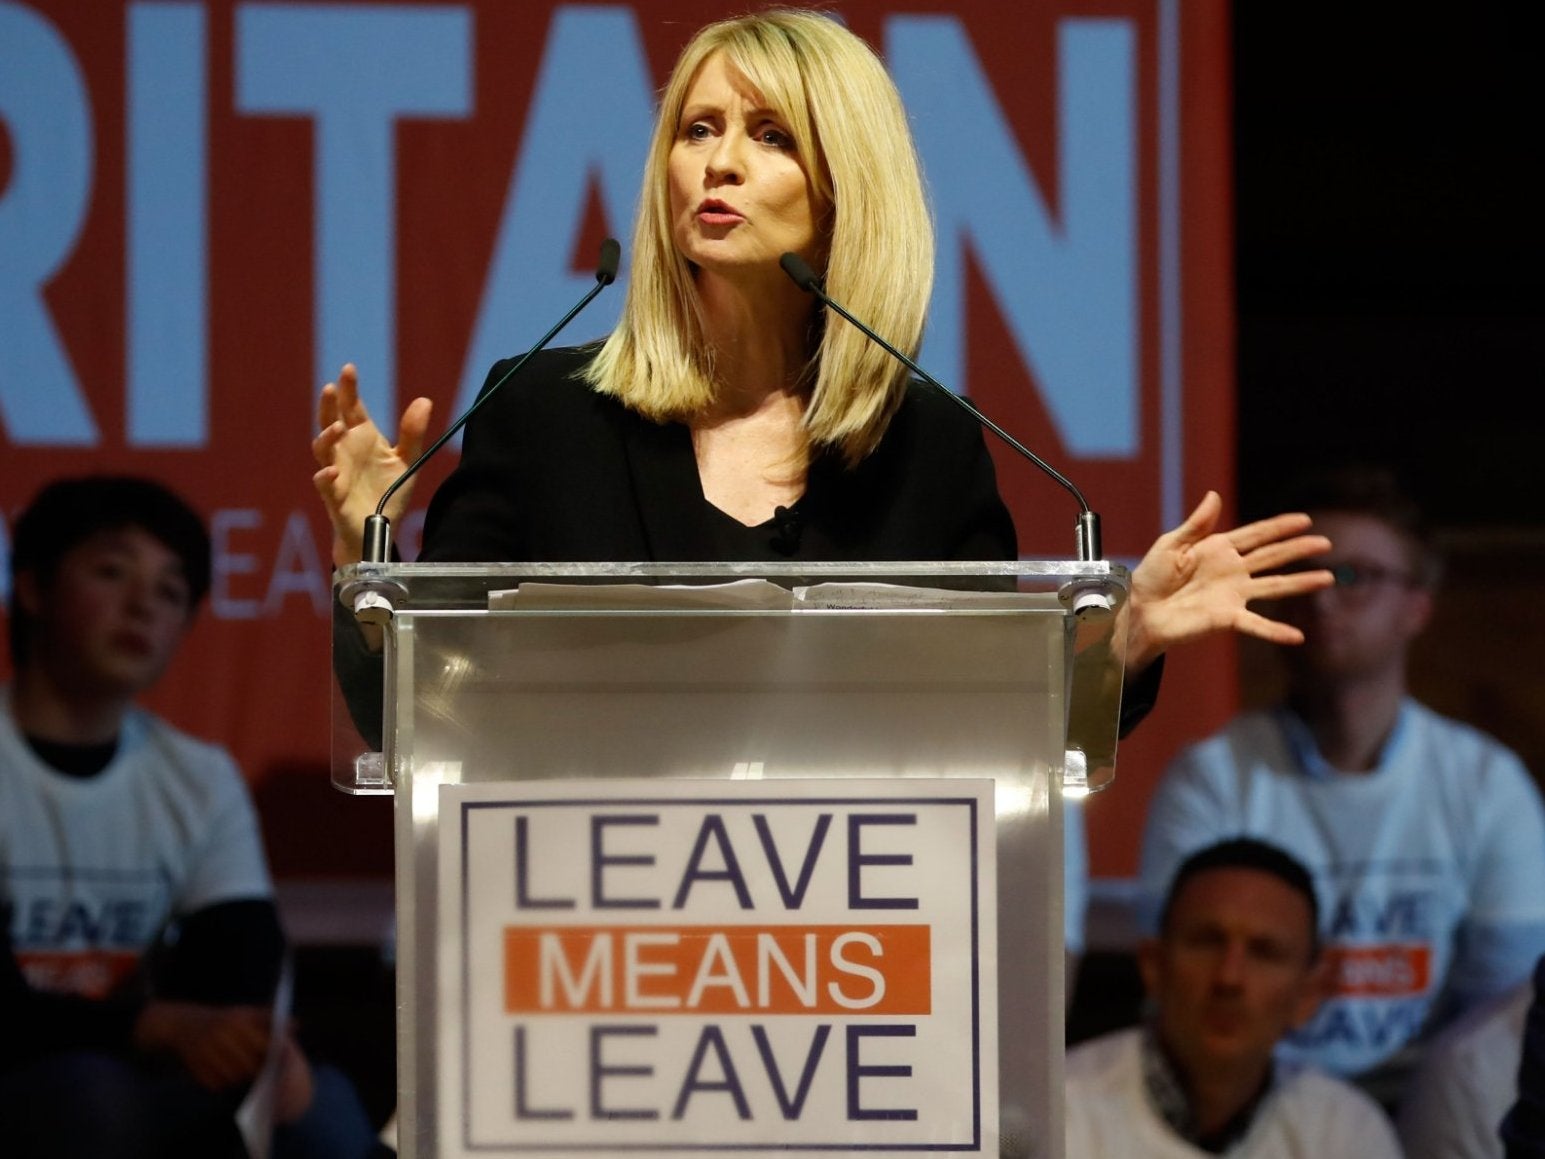 Esther McVey was criticised for sharing an article that said members would have to adopt the currency